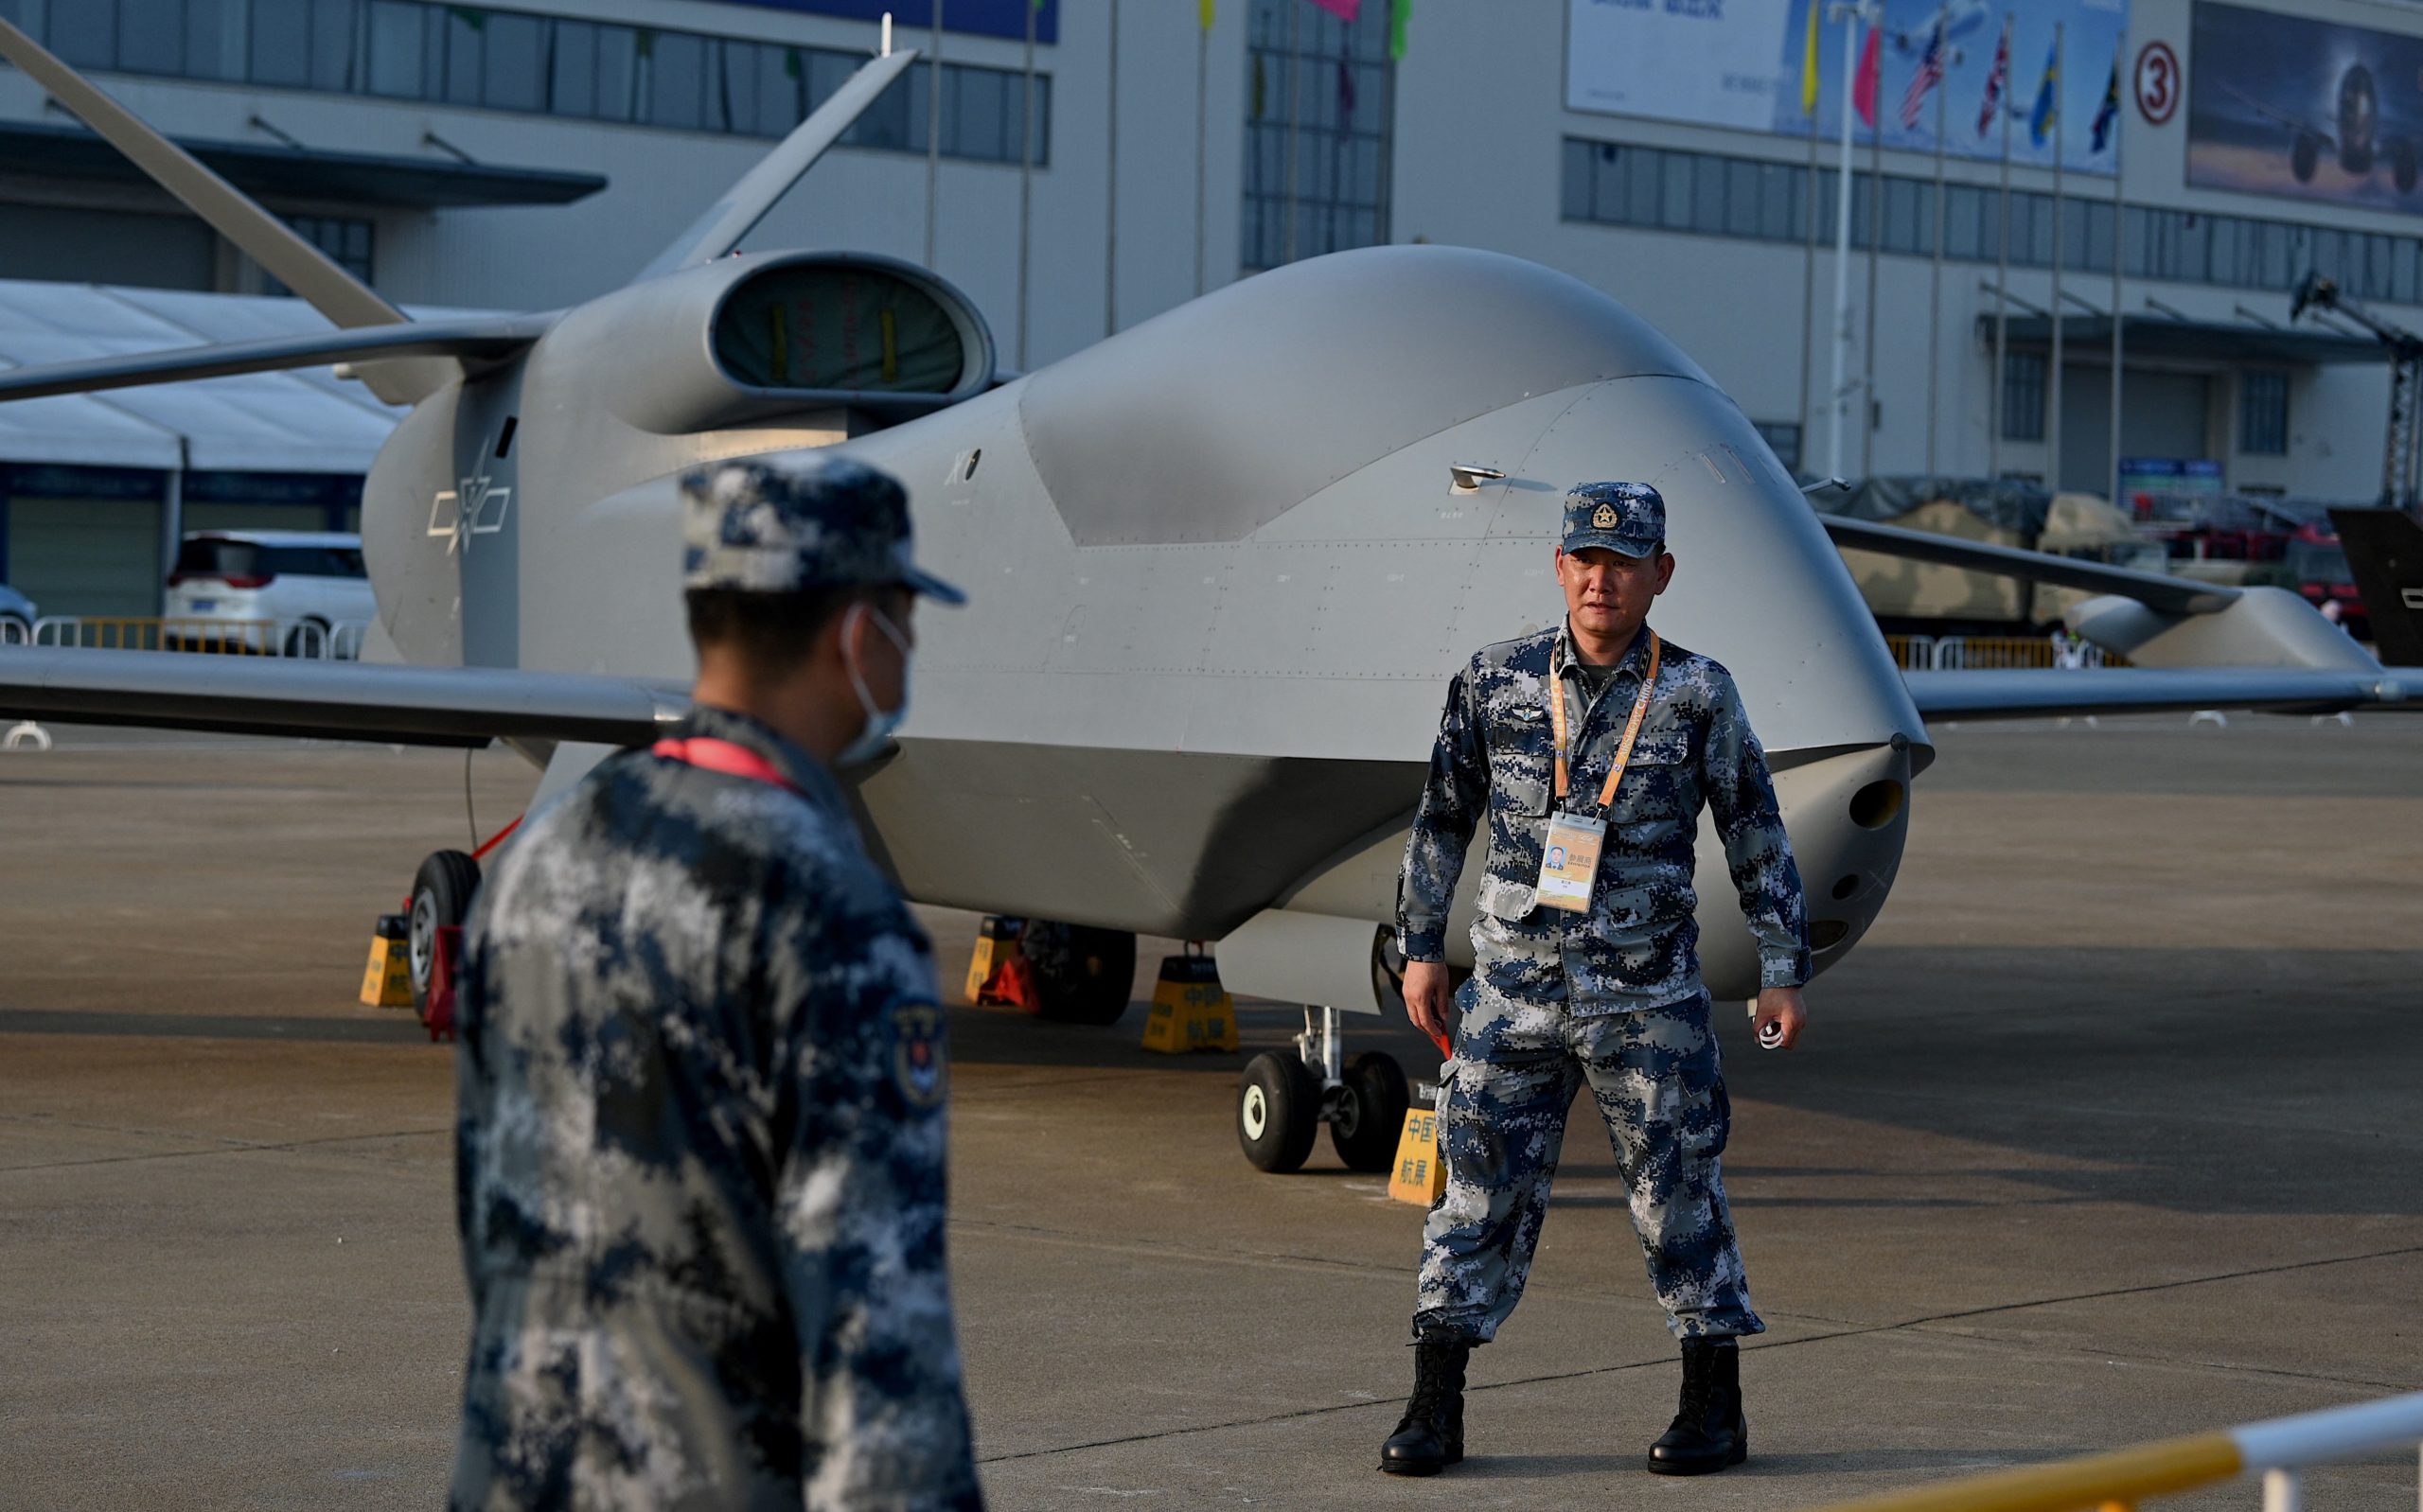 A People's Liberation Army (PLA) Air Force WZ-7 high-altitude reconnaissance drone is seen a day before the 13th China International Aviation and Aerospace Exhibition in Zhuhai in southern China's Guangdong province on September 27, 2021. (Photo by Noel Celis / AFP) (Photo by NOEL CELIS/AFP via Getty Images)